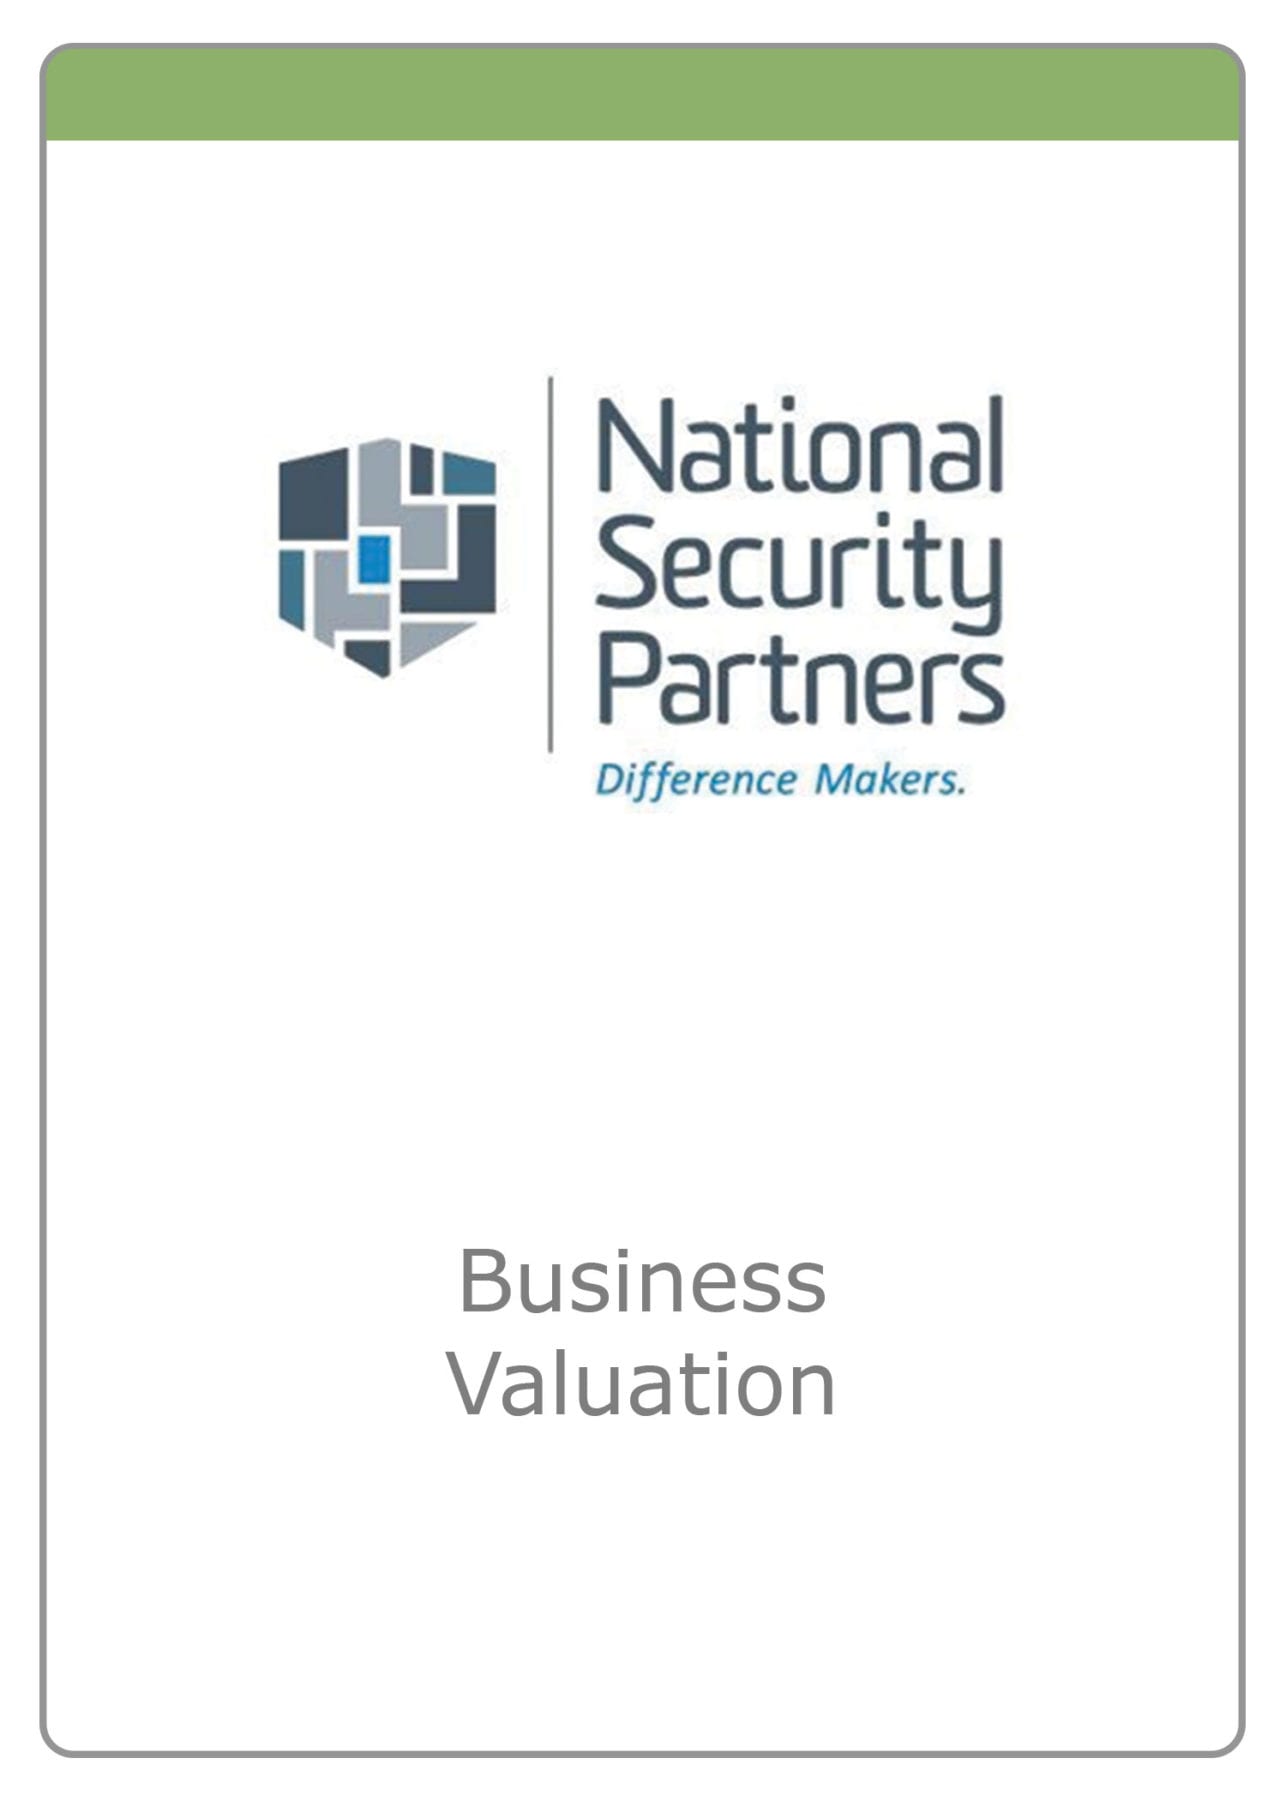 National Security Partners  - Portfolio Valuation - The McLean Group